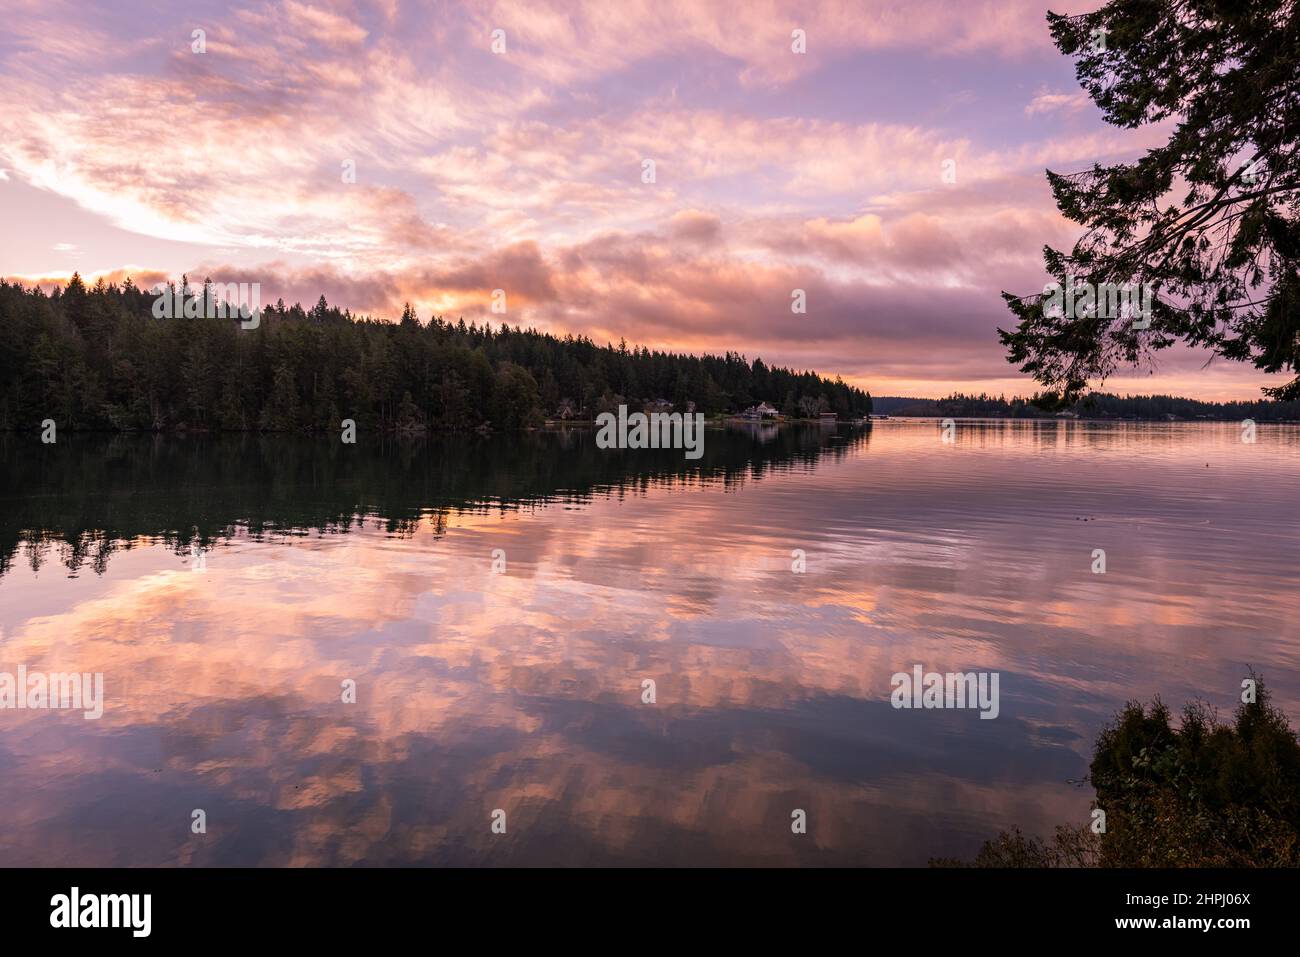 Vibrantly colorful peaceful sunrise sky reflections over forest and water on the Puget Sound, Washington State, Pacific Northwest Stock Photo